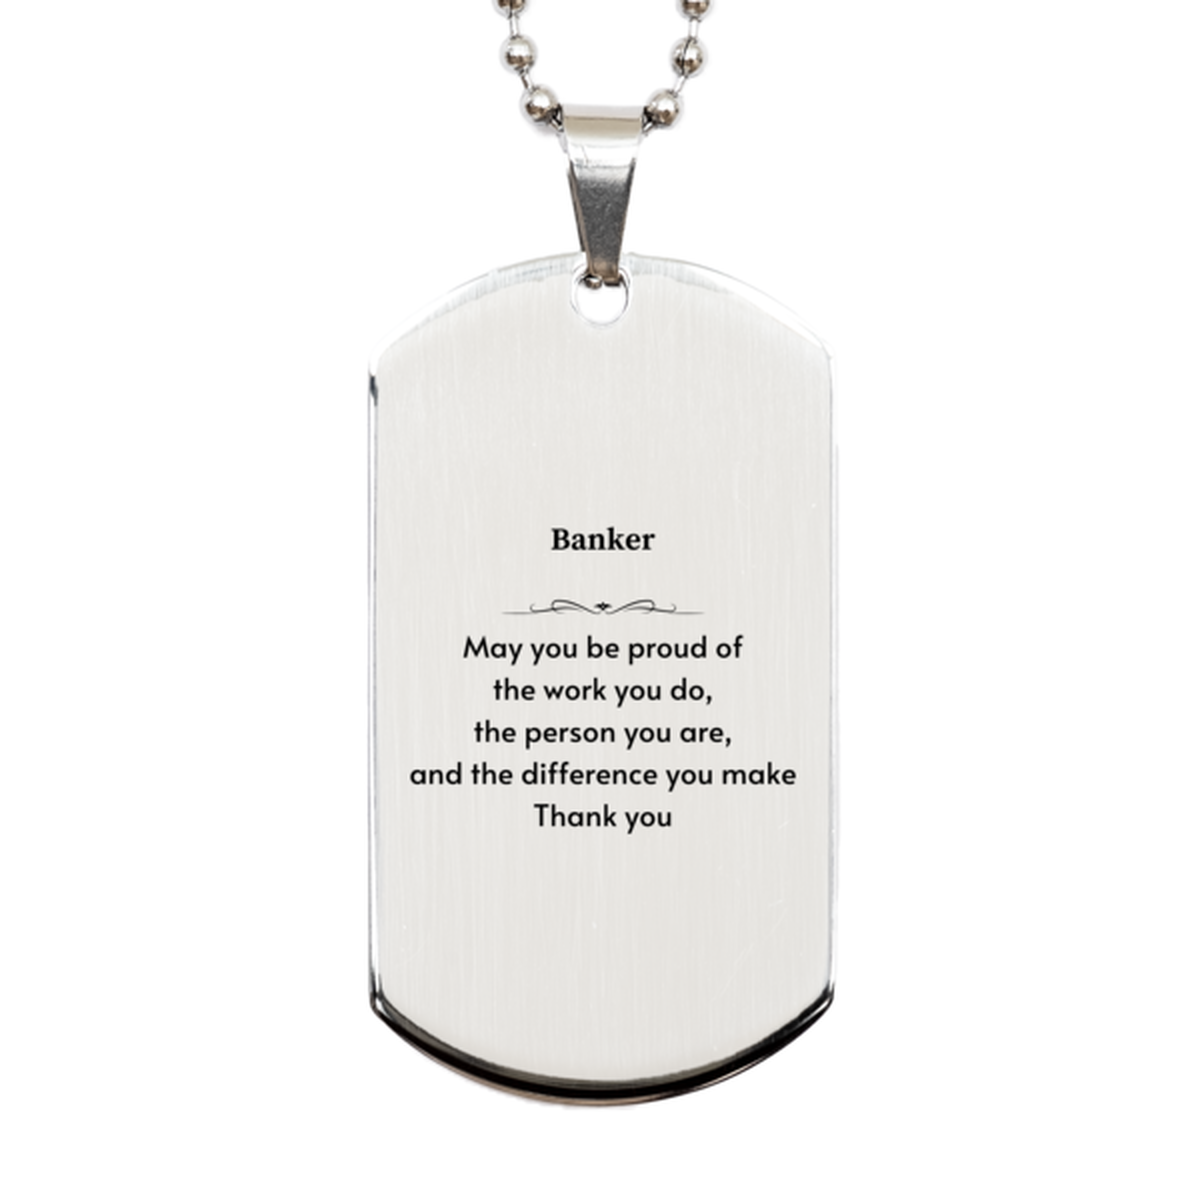 Heartwarming Silver Dog Tag Retirement Coworkers Gifts for Banker, Banker May You be proud of the work you do, the person you are Gifts for Boss Men Women Friends